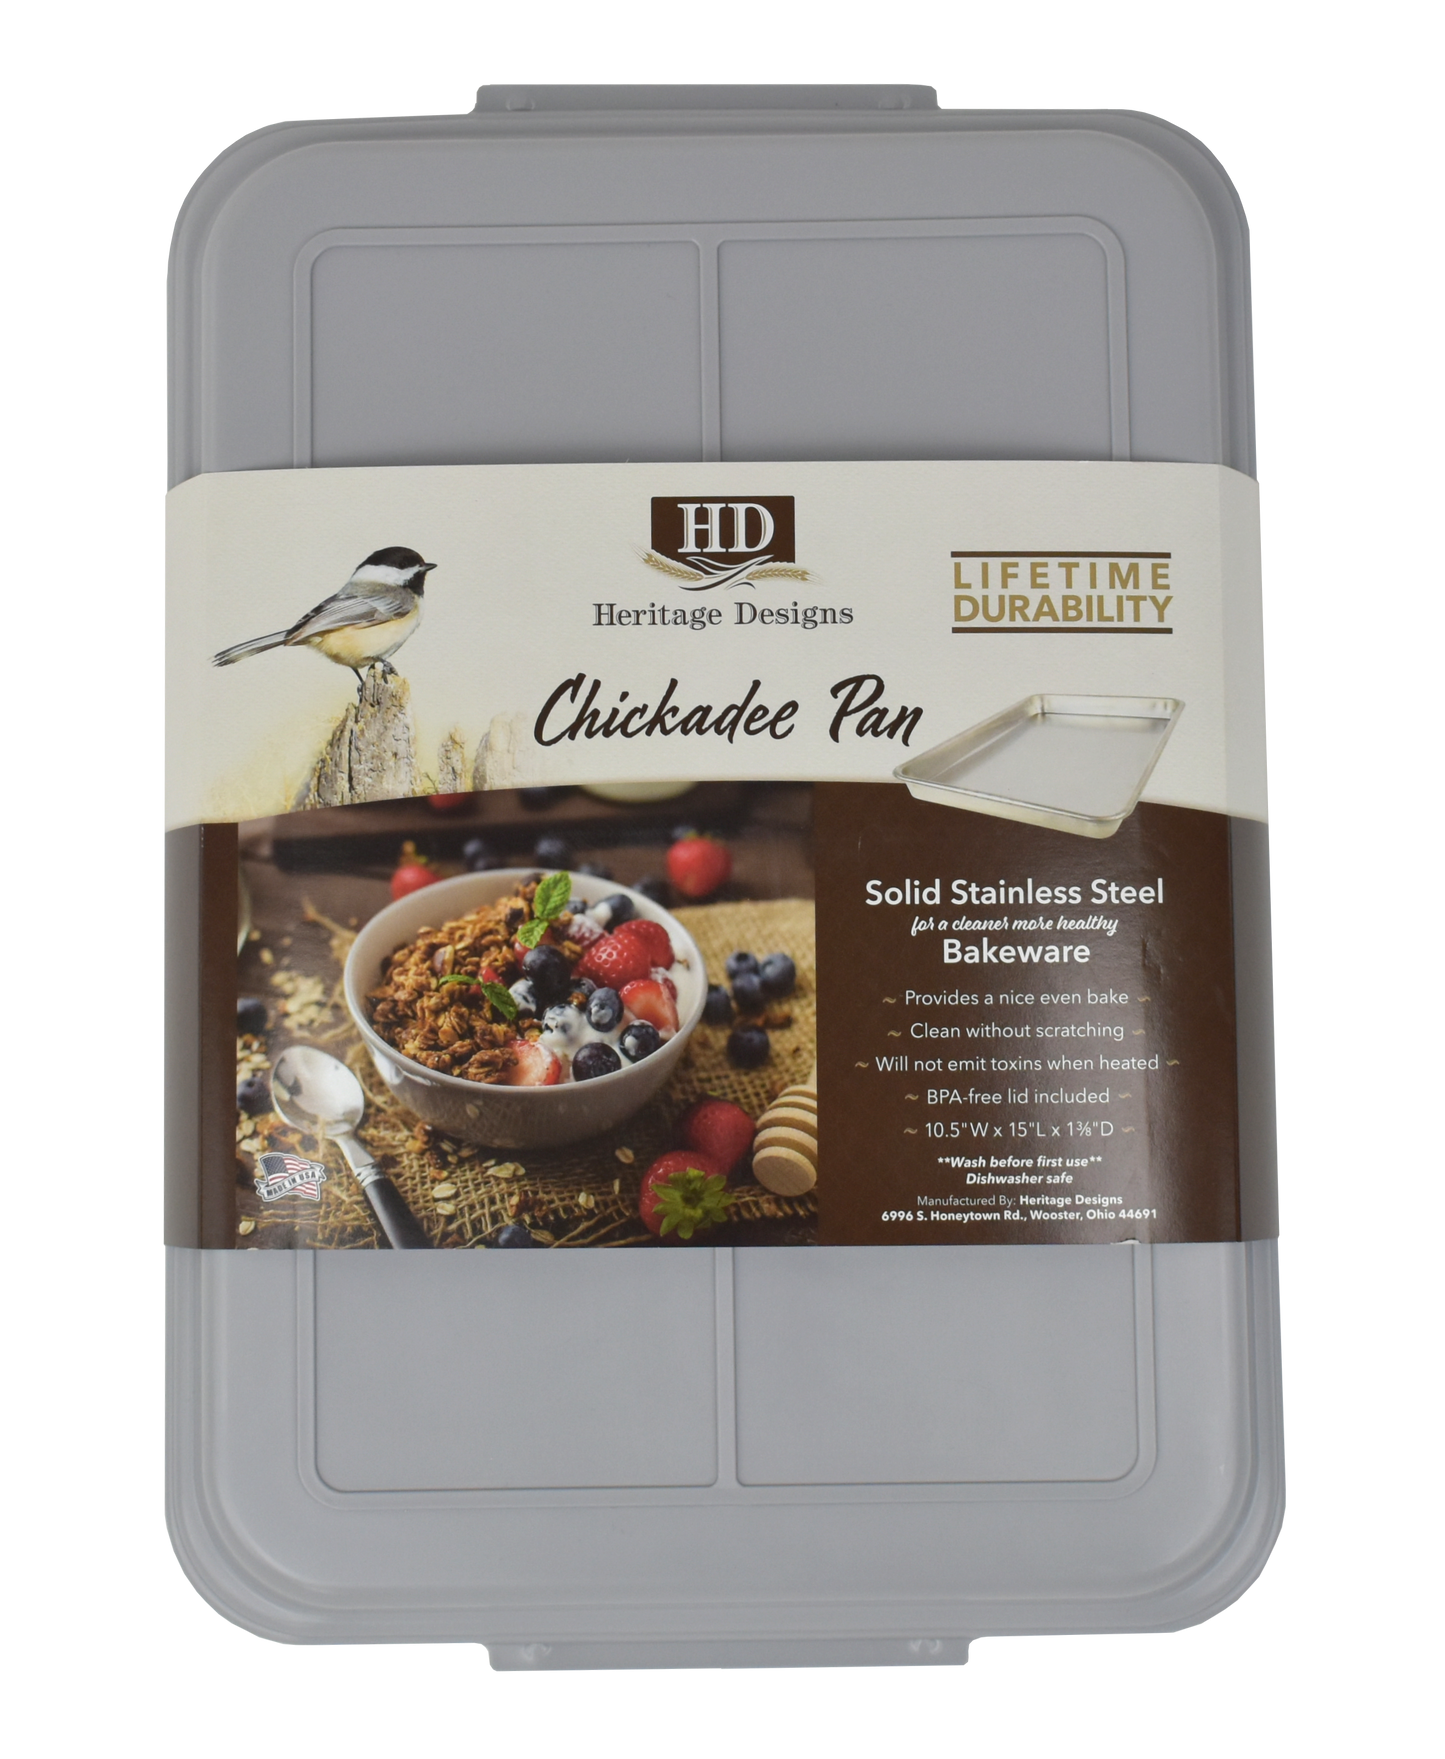 Chickadee Baking Pan - Solid Stainless-Steel